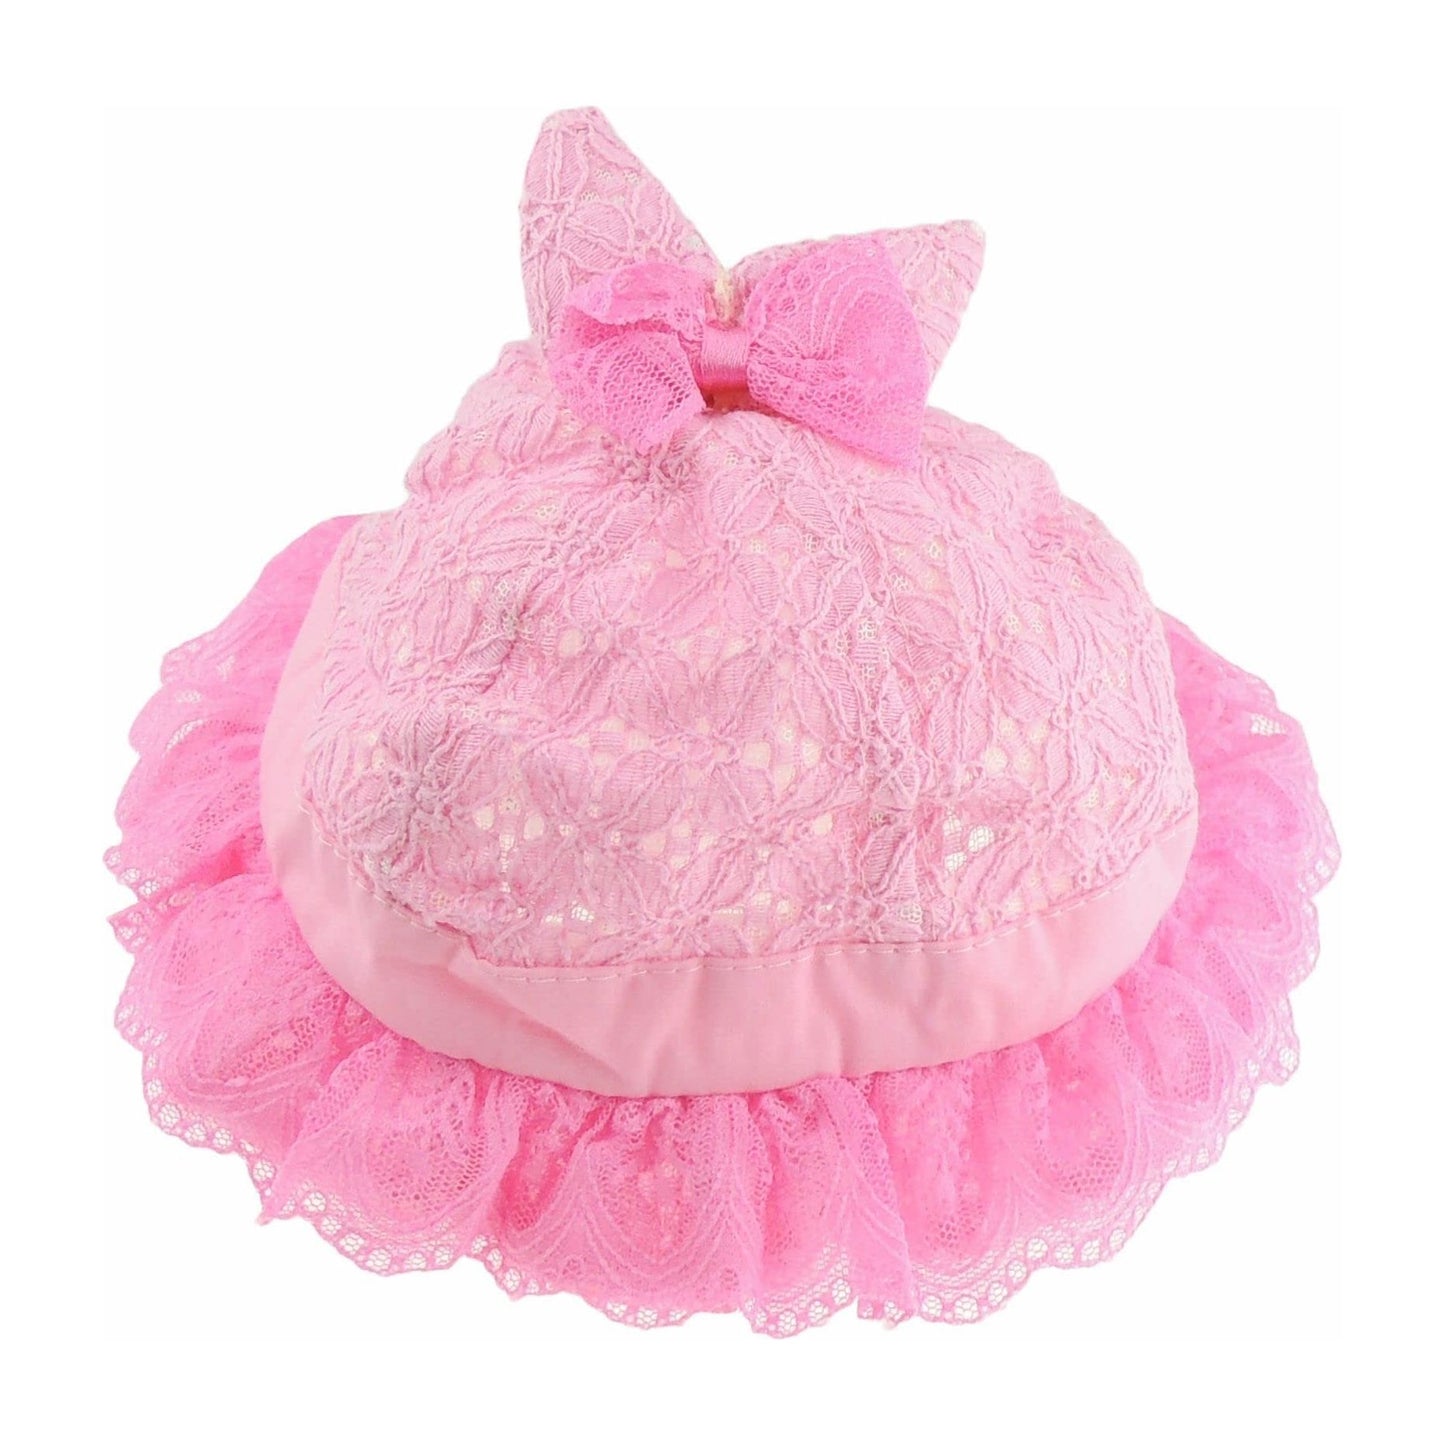 Baby Girls Lace Covered Bow Trim Bucket Sun Cap Hat 0-6 Months